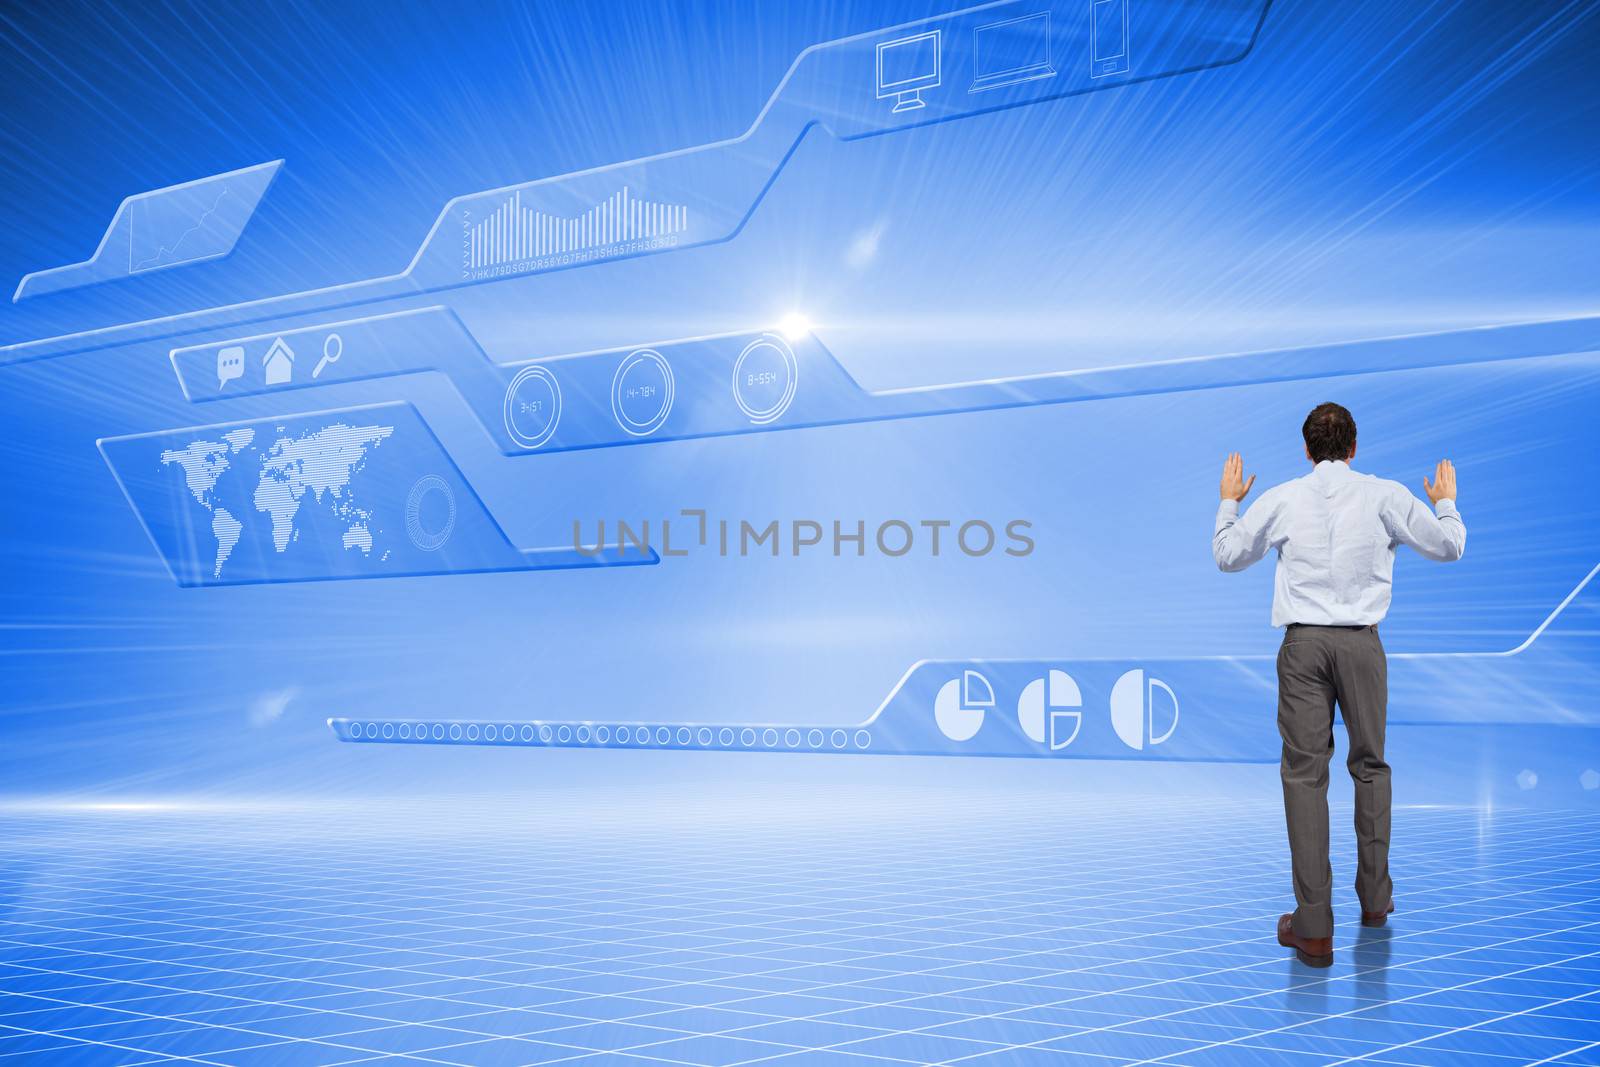 Composite image of businessman posing with hands up by Wavebreakmedia